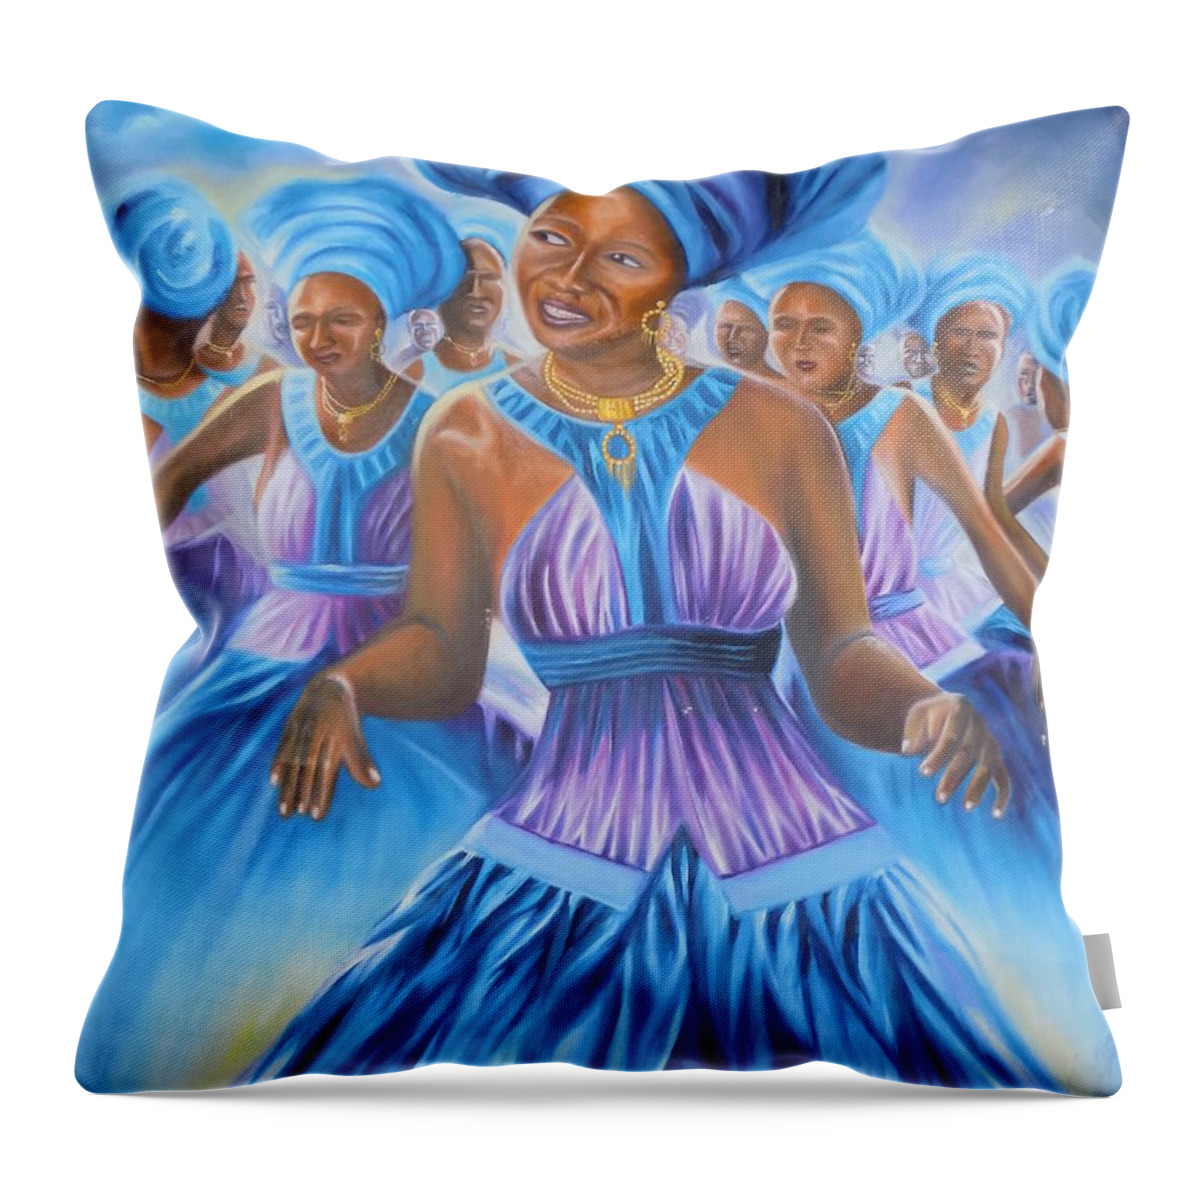 House Throw Pillow featuring the painting Dance Tune by Olaoluwa Smith